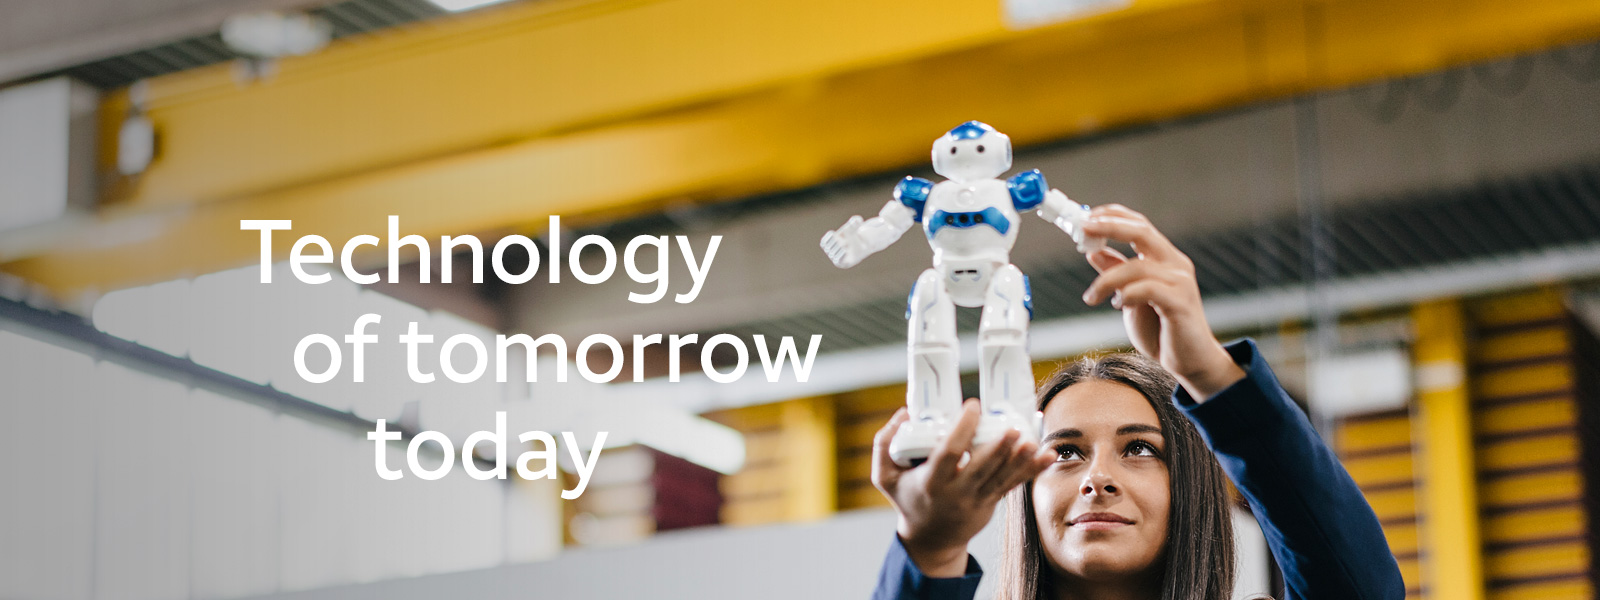 Technology of tomorrow today